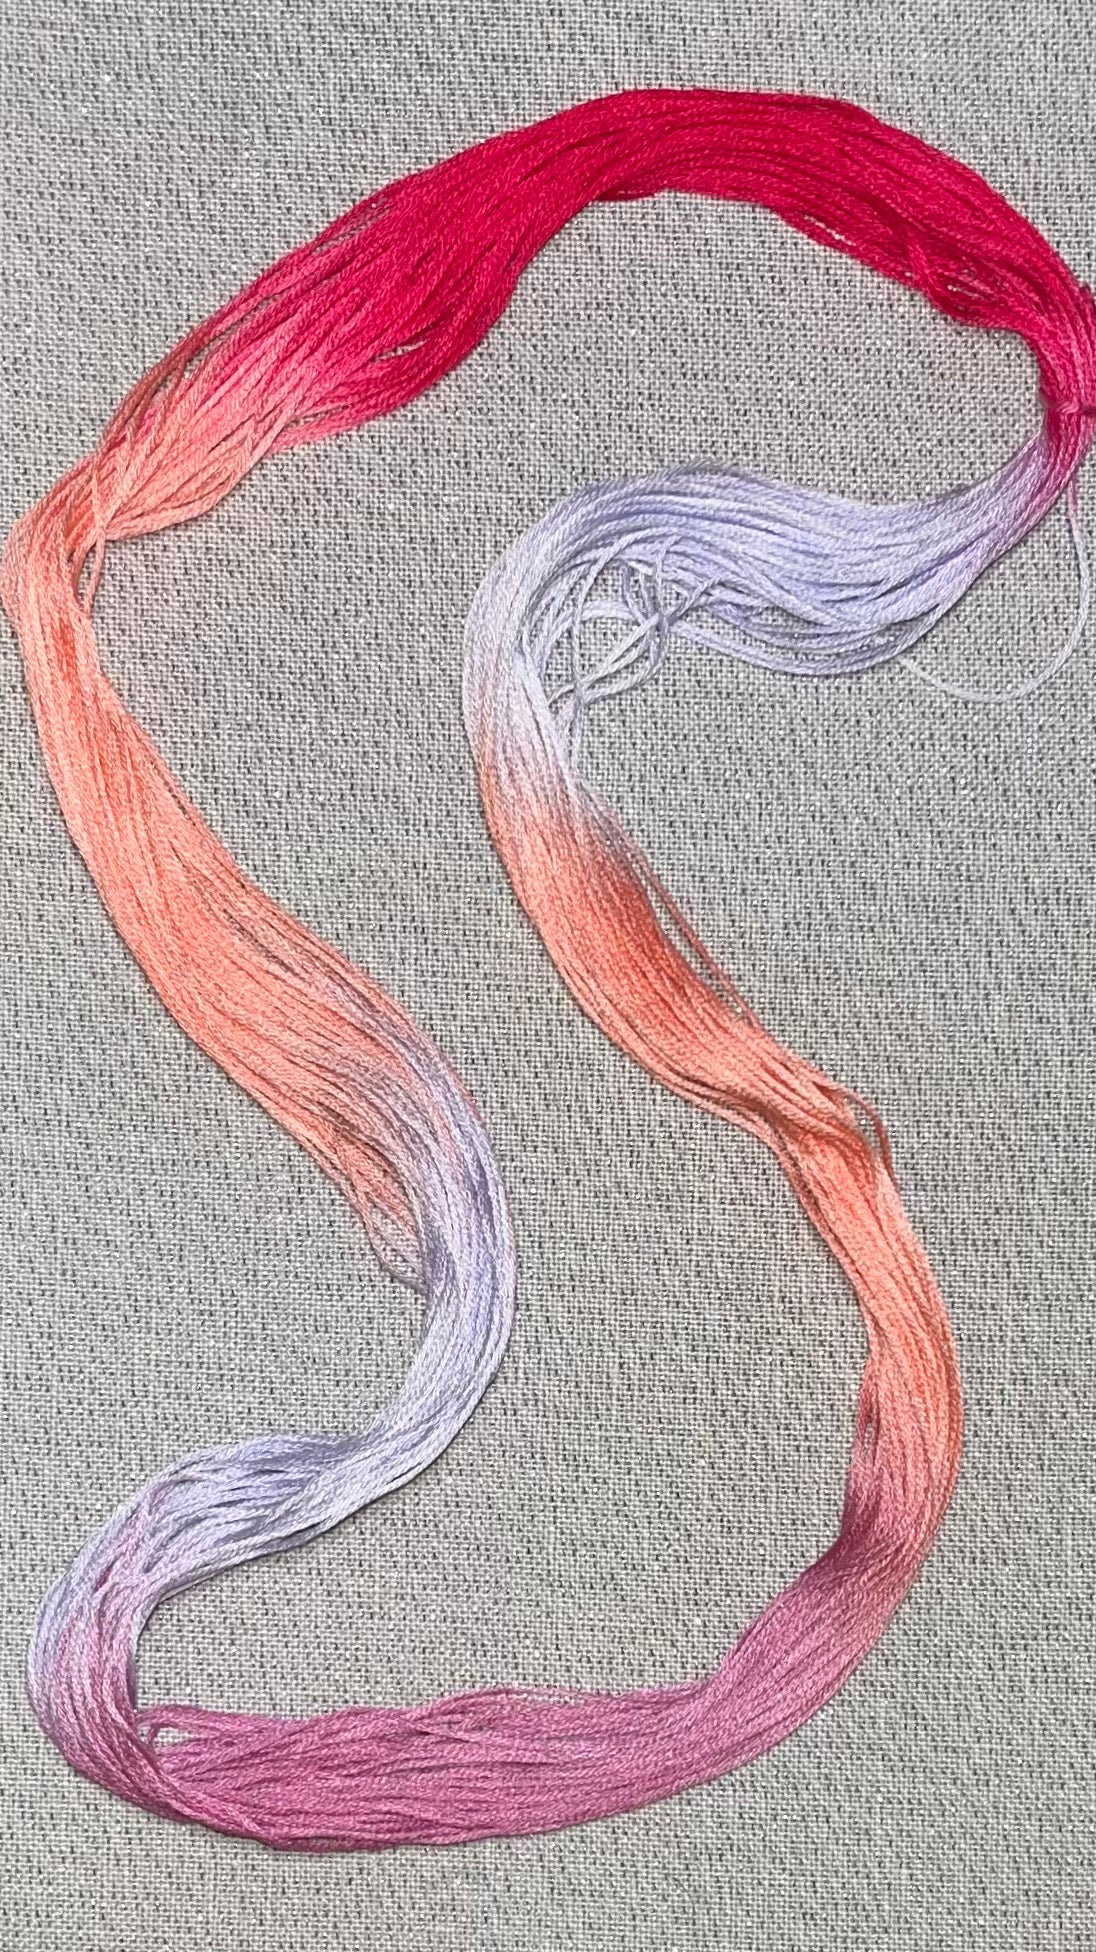 Cotton hand dyed floss - Impatiens